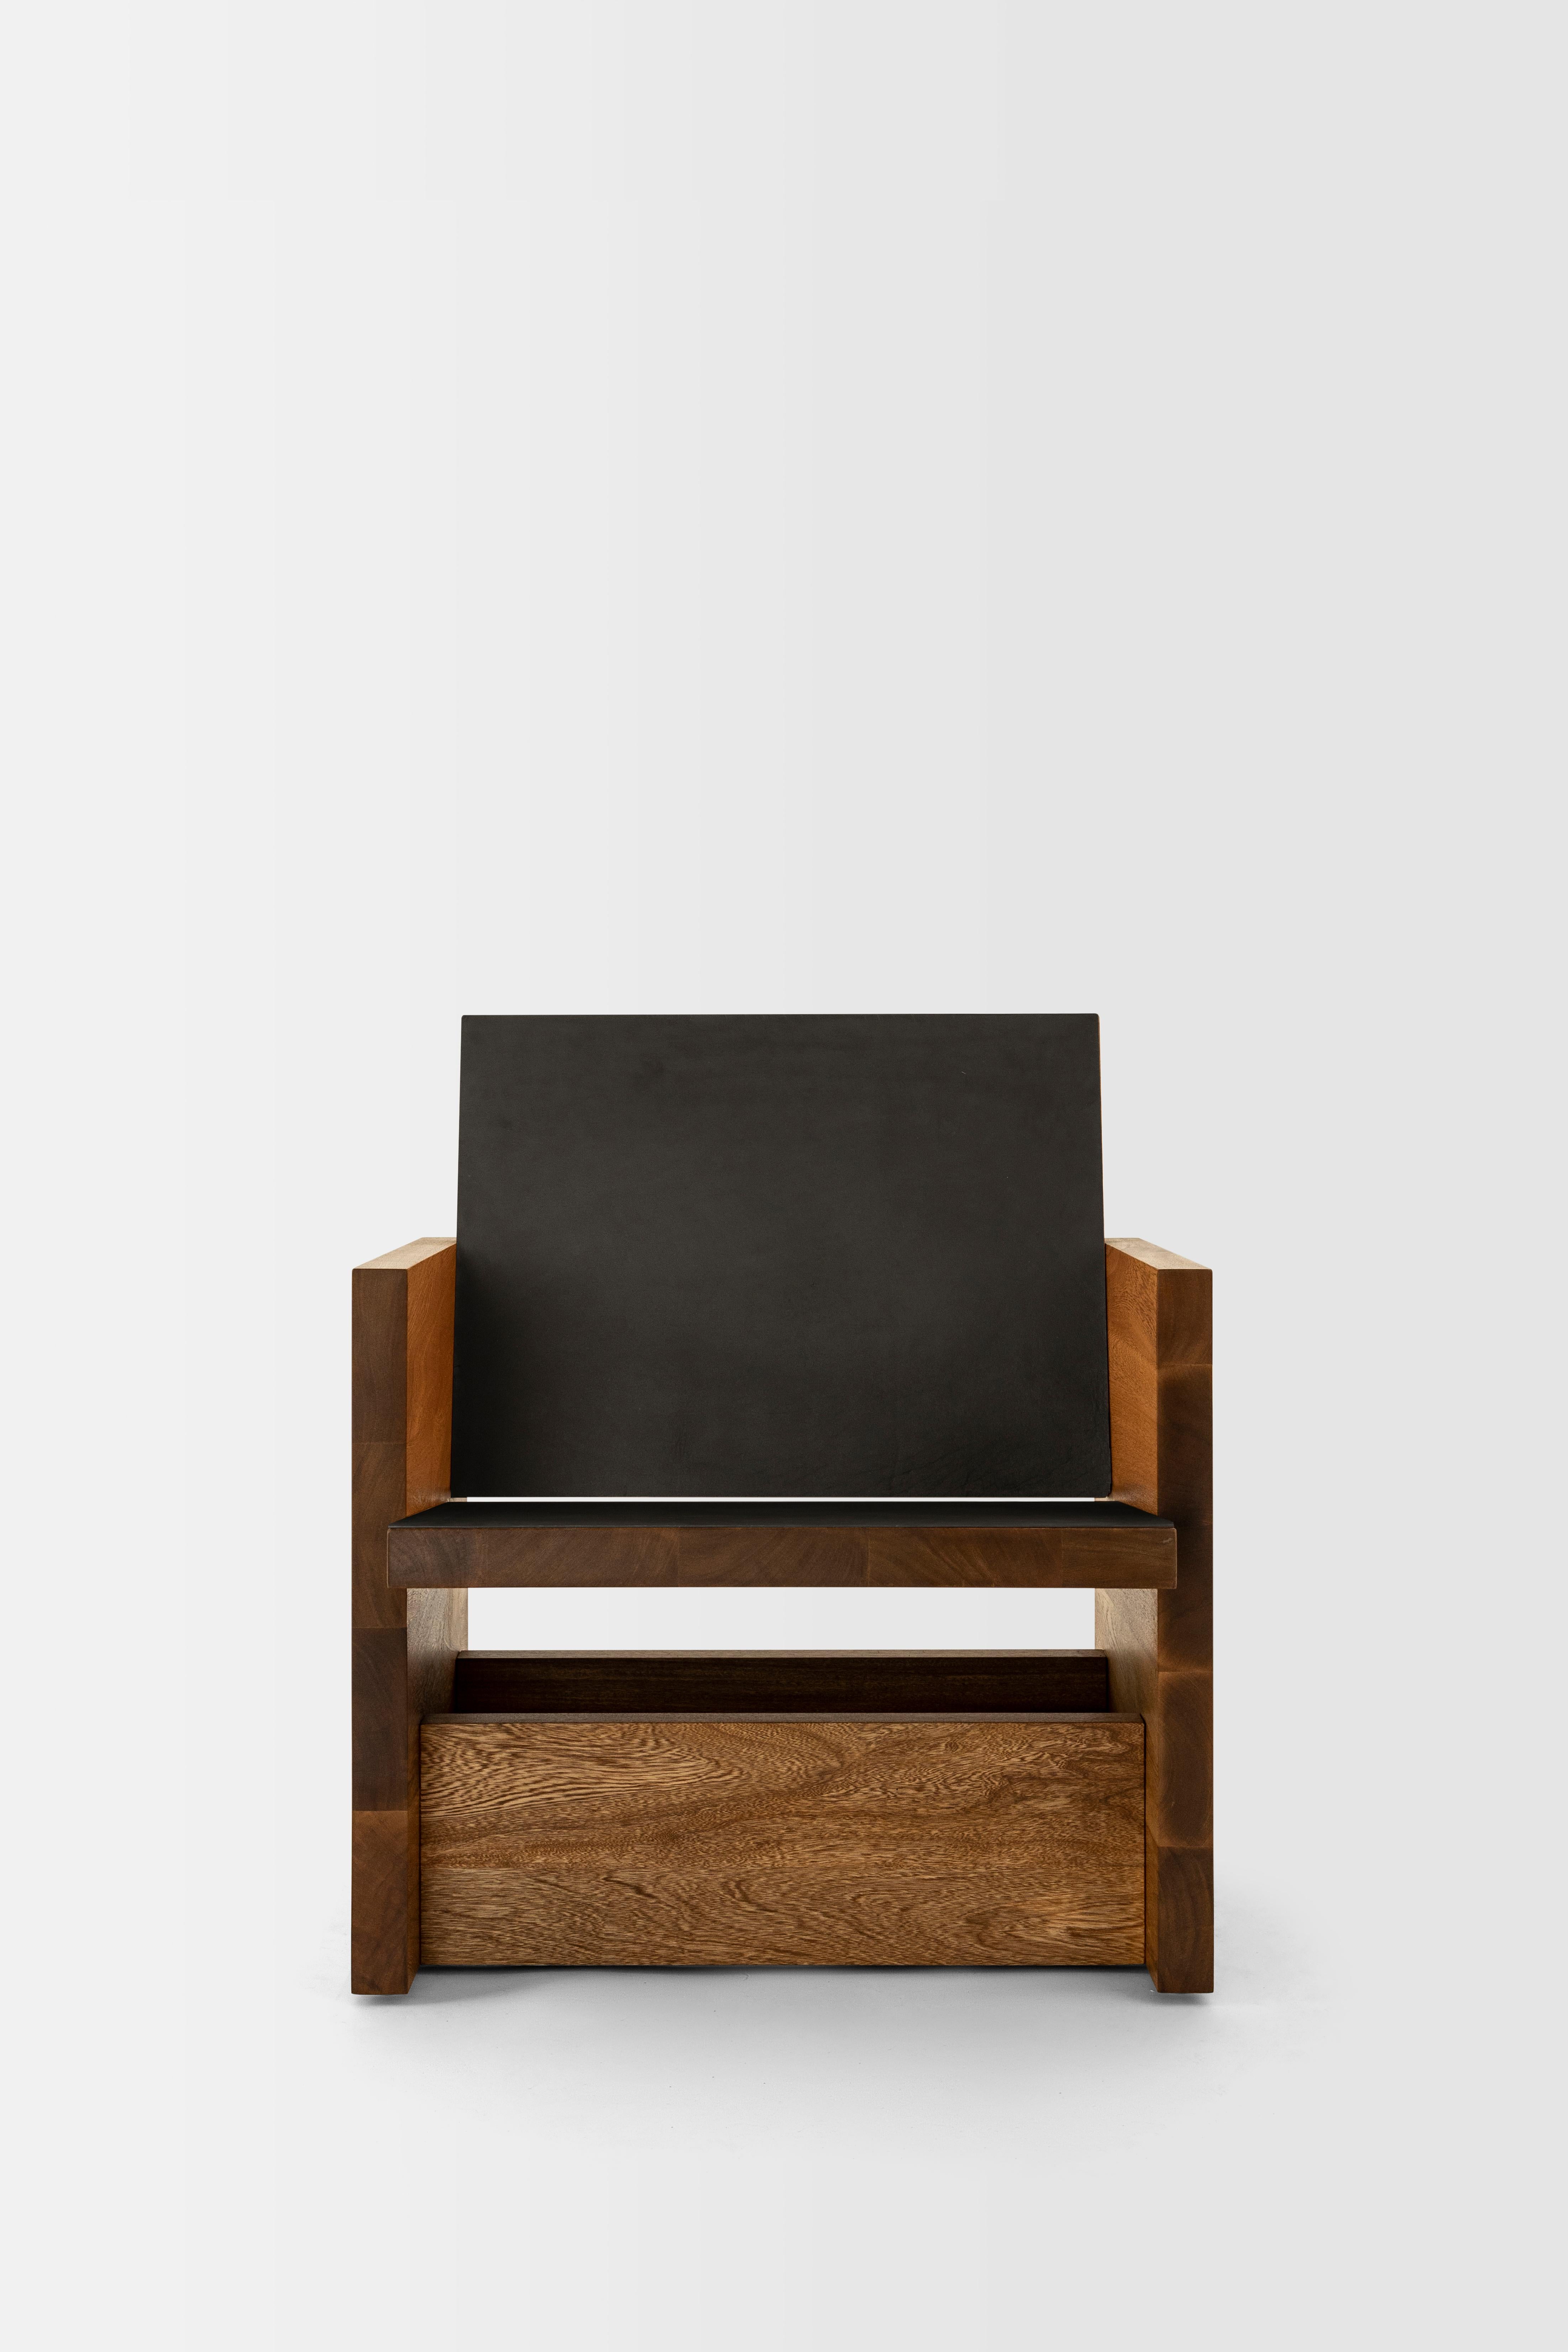 Simple lines and noble materials define Clavijero, a lounge chair and bench. Made by hand using traditional carpentry techniques, these two pieces are created for conversation, reading, rest, and contemplation.

Clavijero takes its name from one